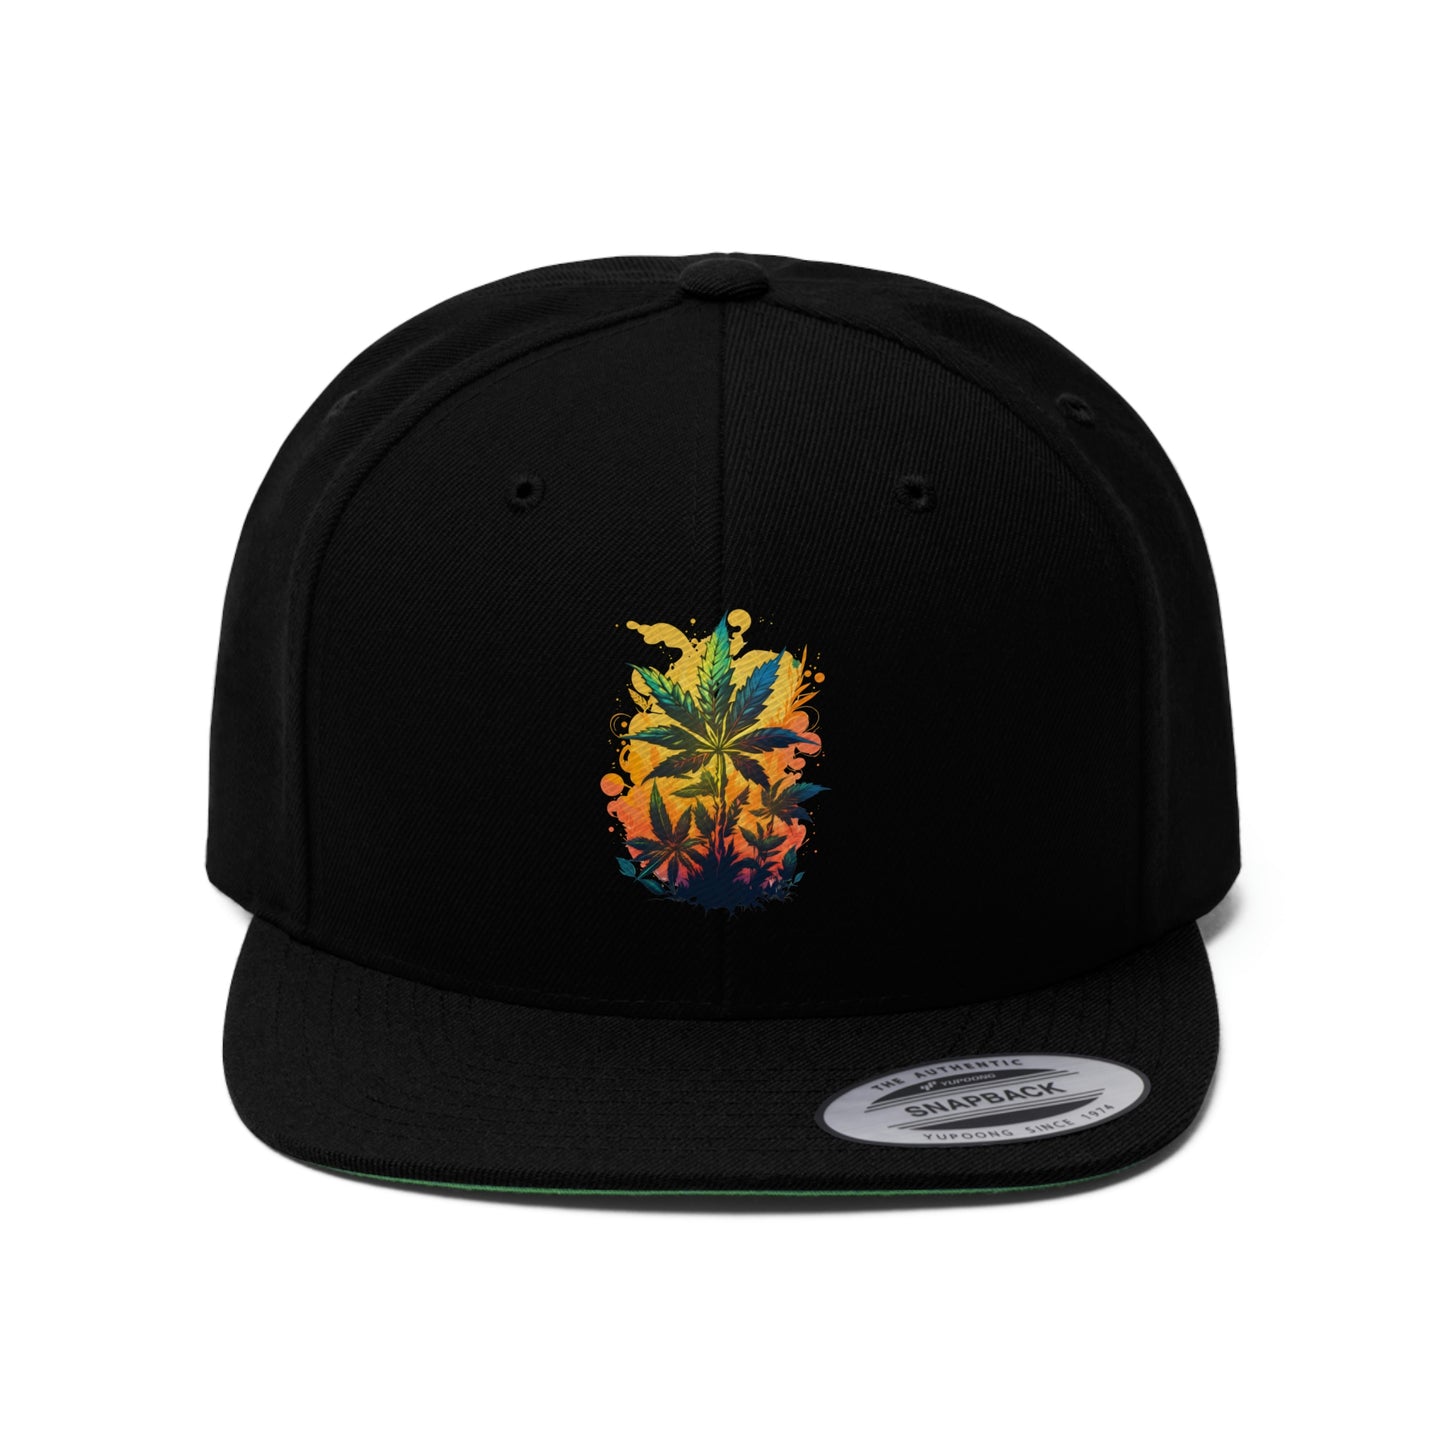 Warm Cannabis Paradise Snapback Hat with weed leaves on an orange and yellow background in the black on black color way